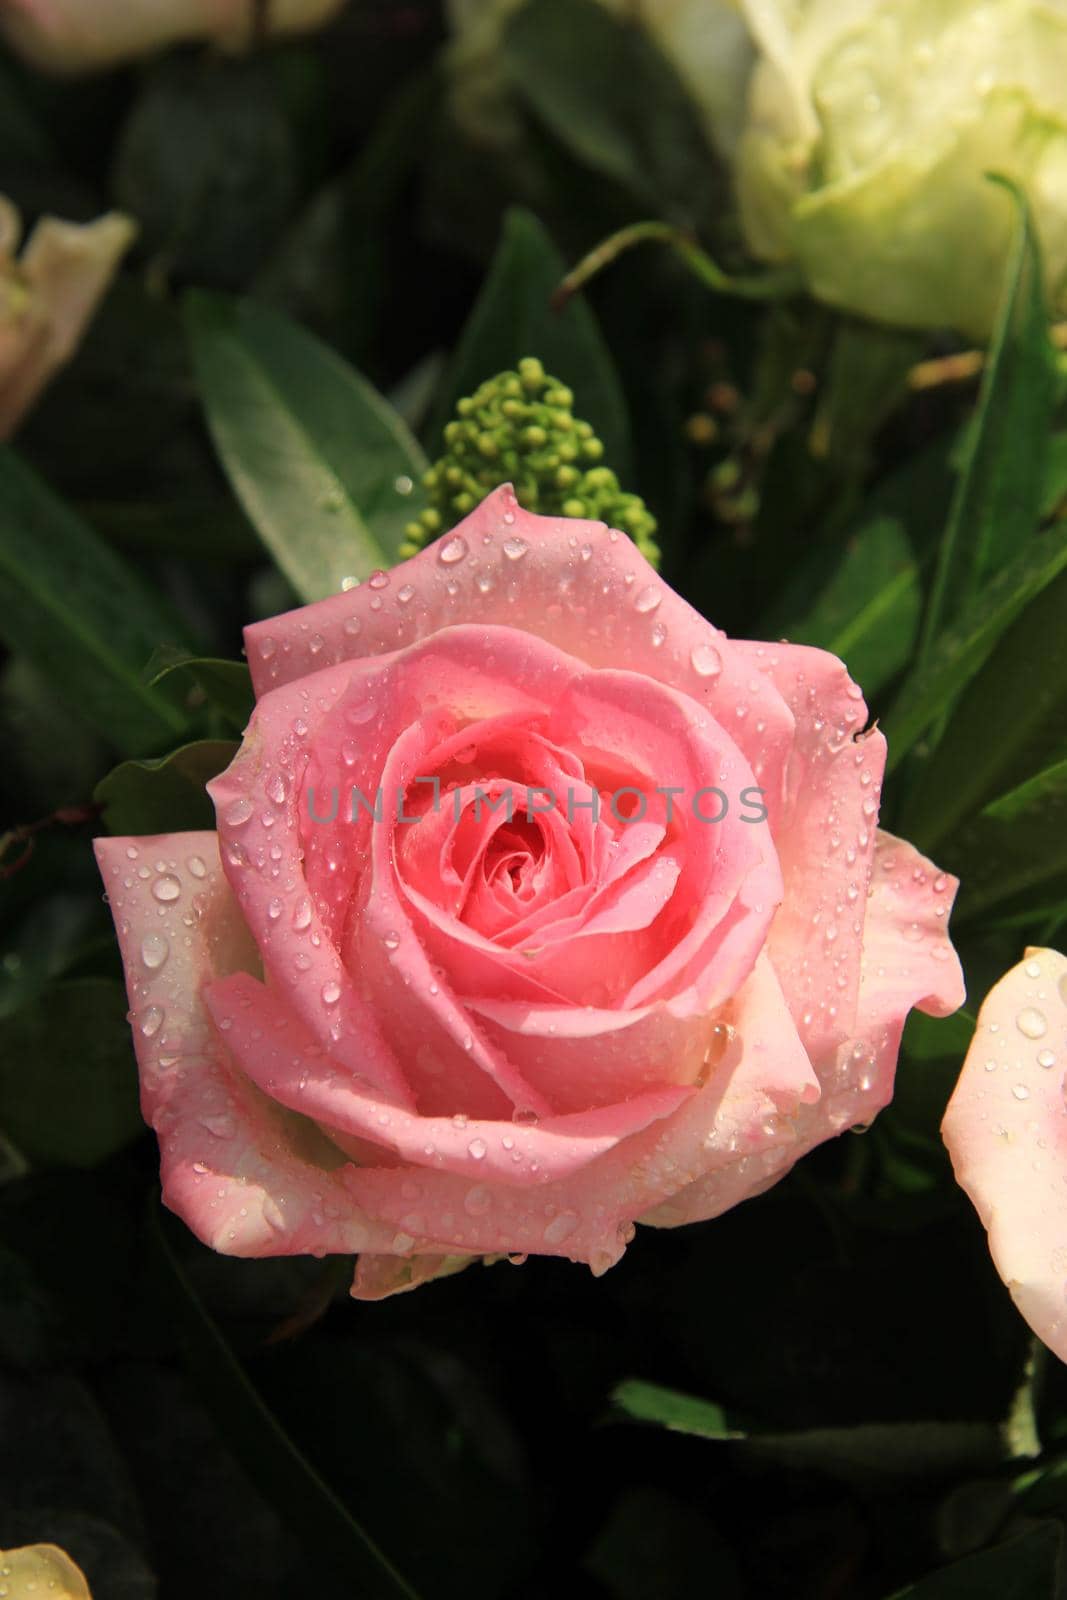 Big pink rose with water drops after a rainshower by studioportosabbia